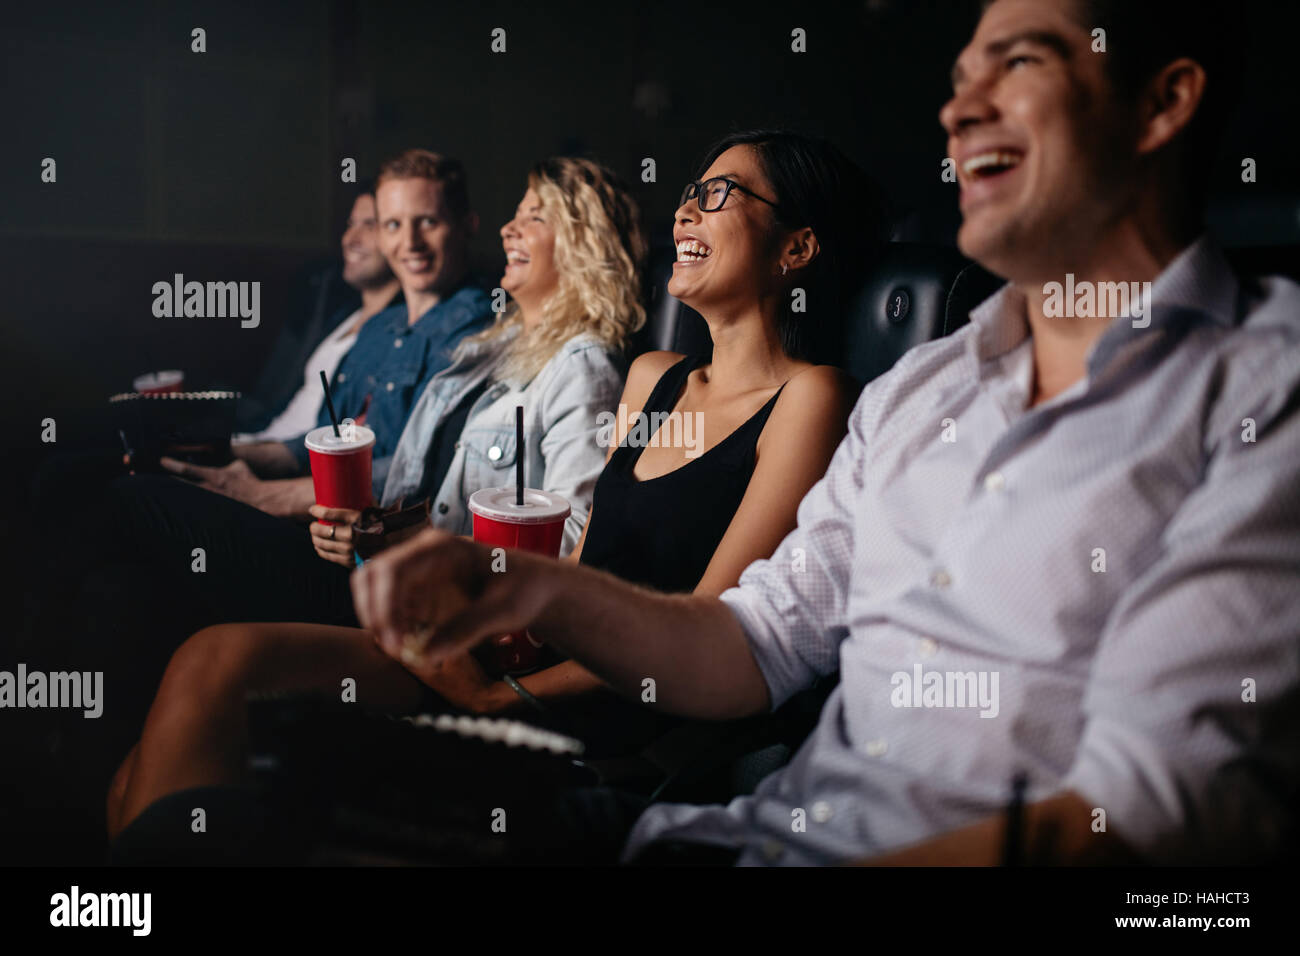 Young people sitting in multiplex movie theater watching movie and smiling. Stock Photo